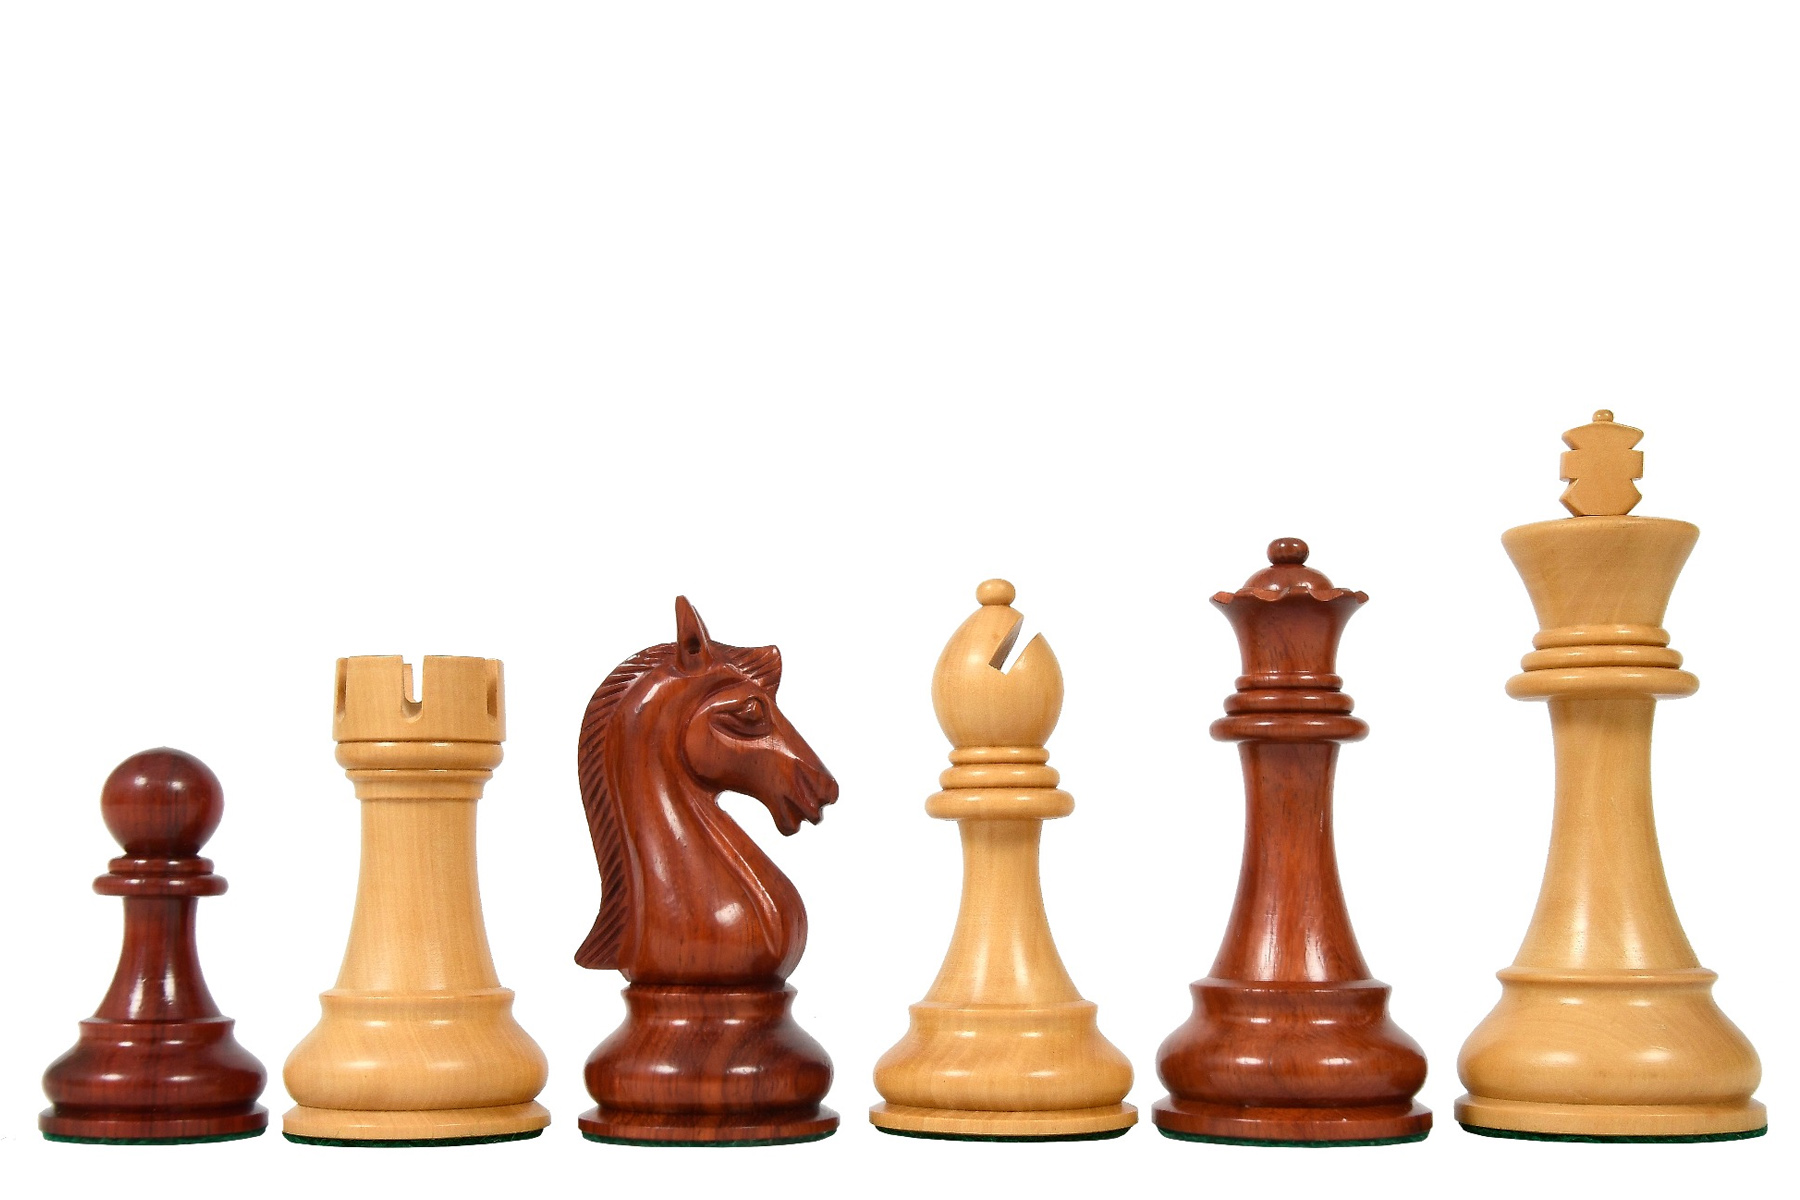 INTRICATELY HAND CARVED DELUXE KNIGHT EBONIZED WOODEN CHESS PIECES 4 QUEENS!!! 